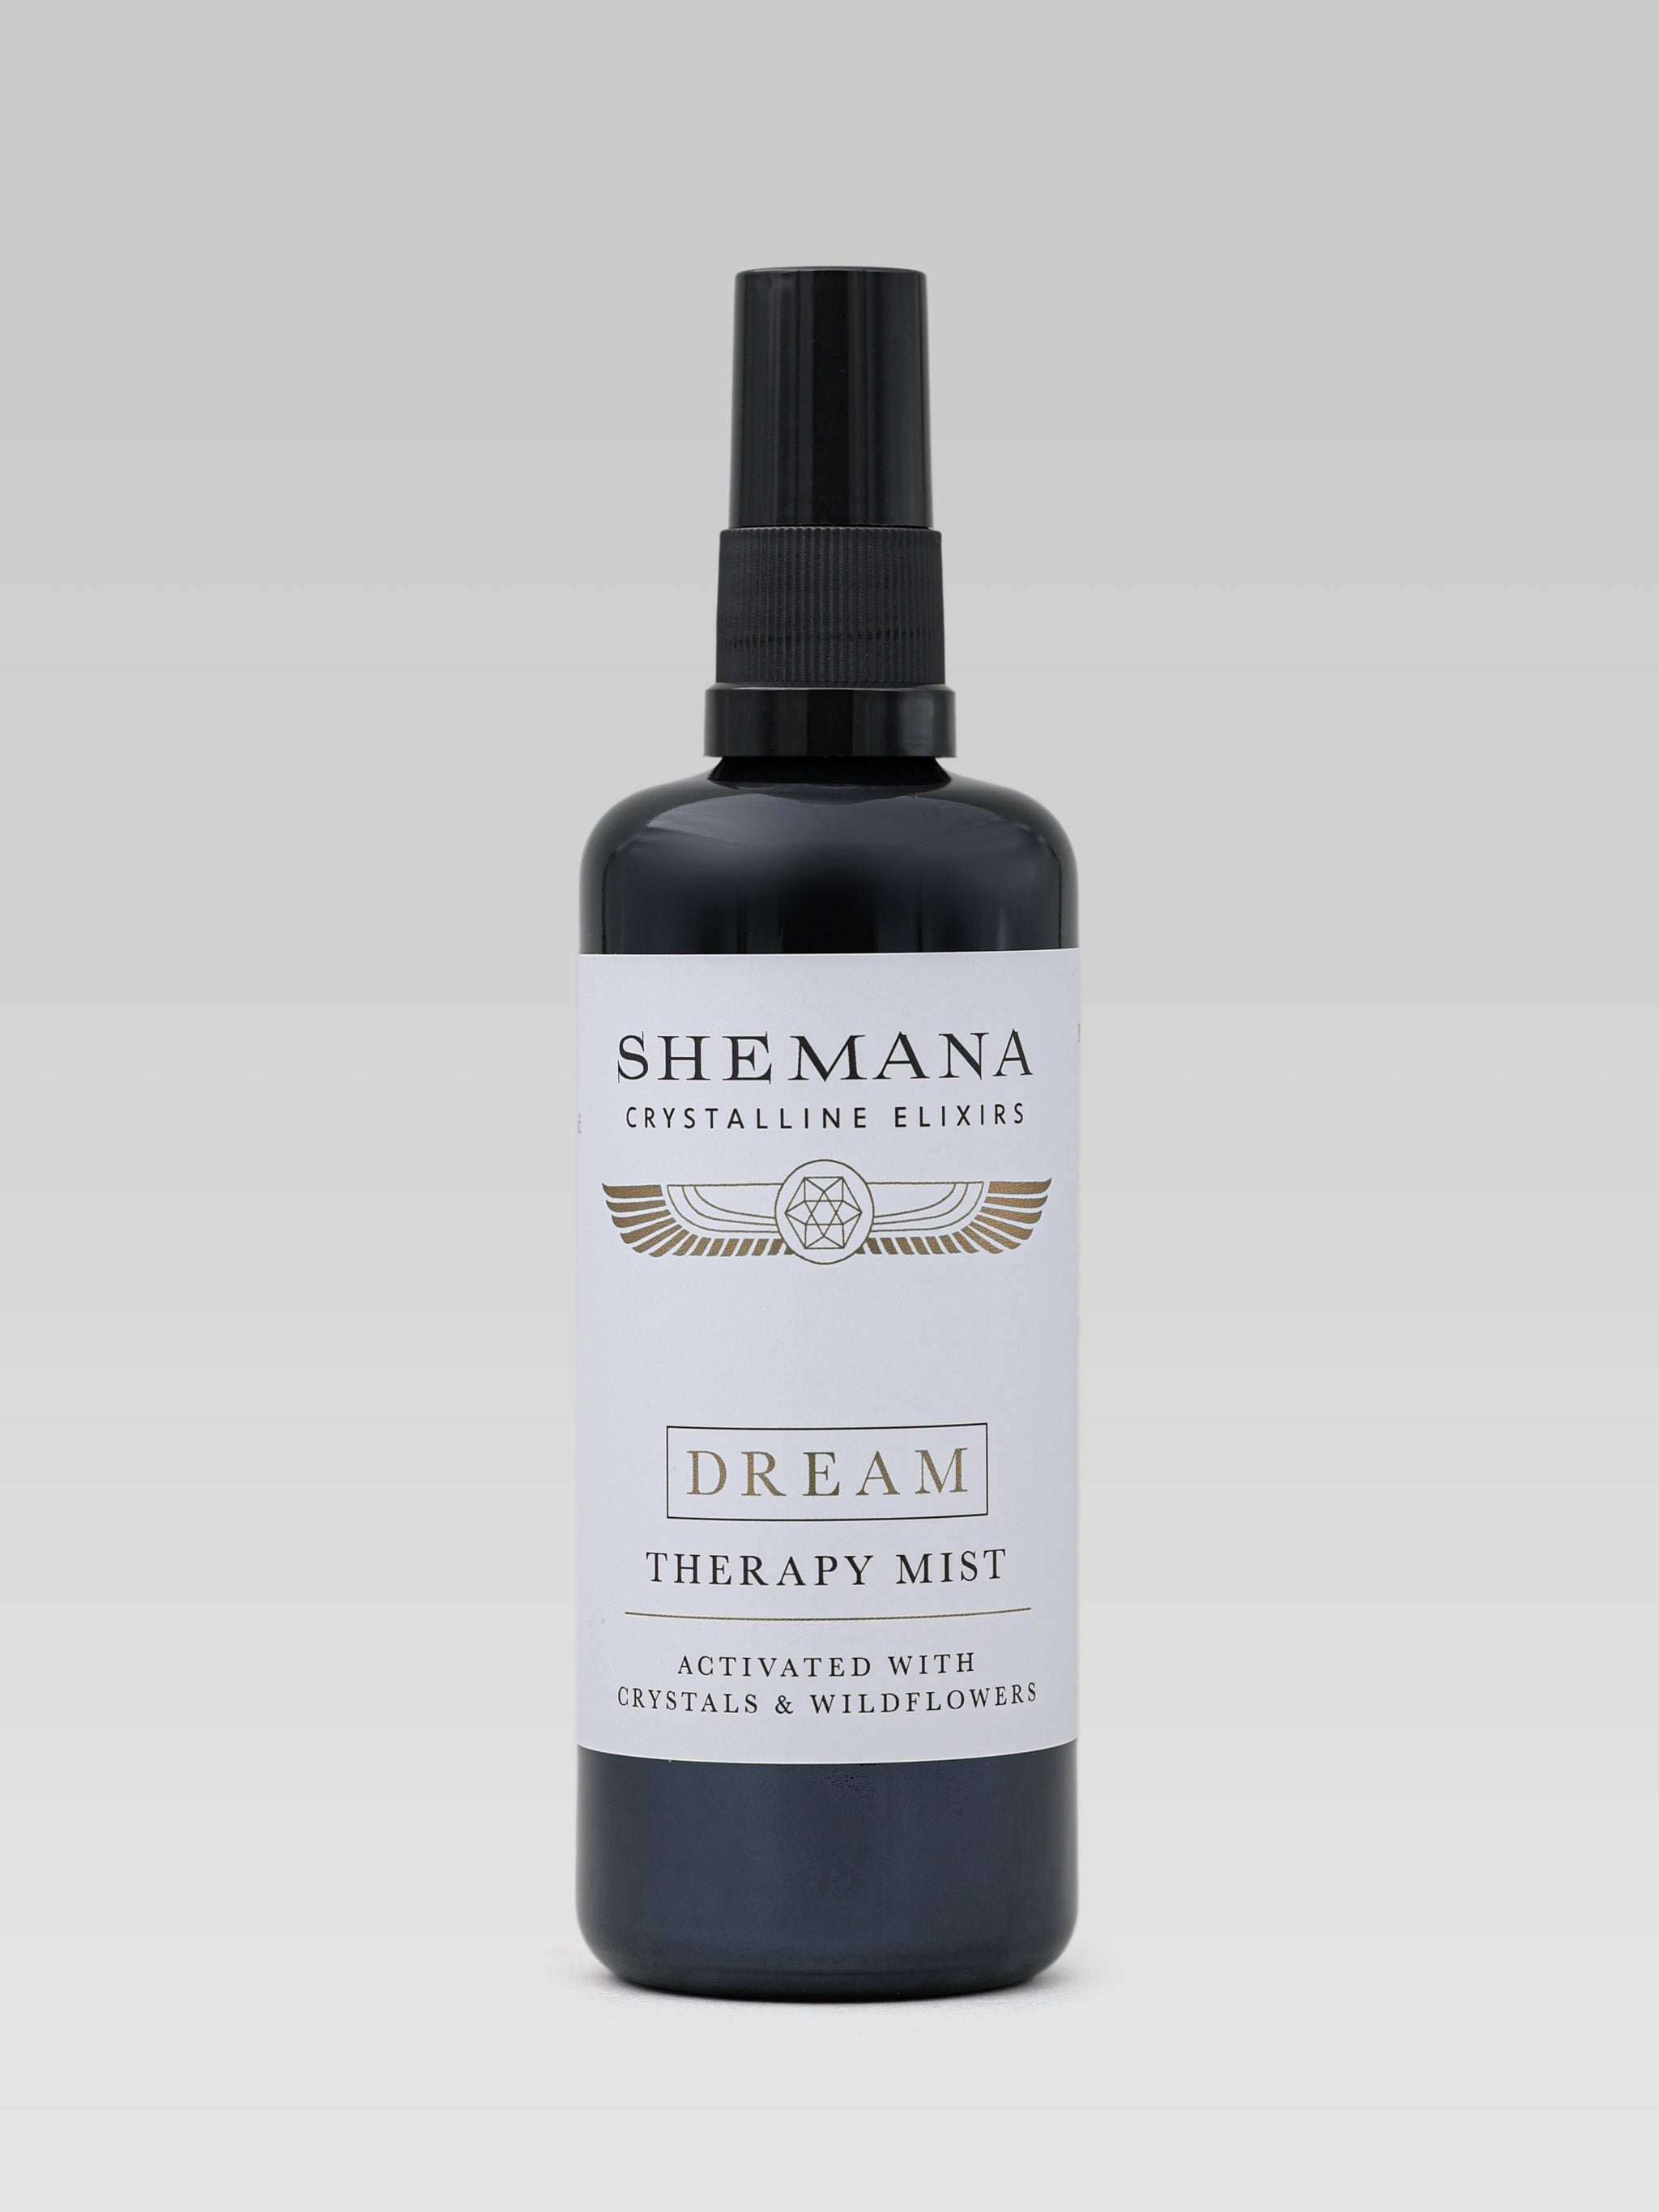 Shemana Dream Therapy Mist product shot 